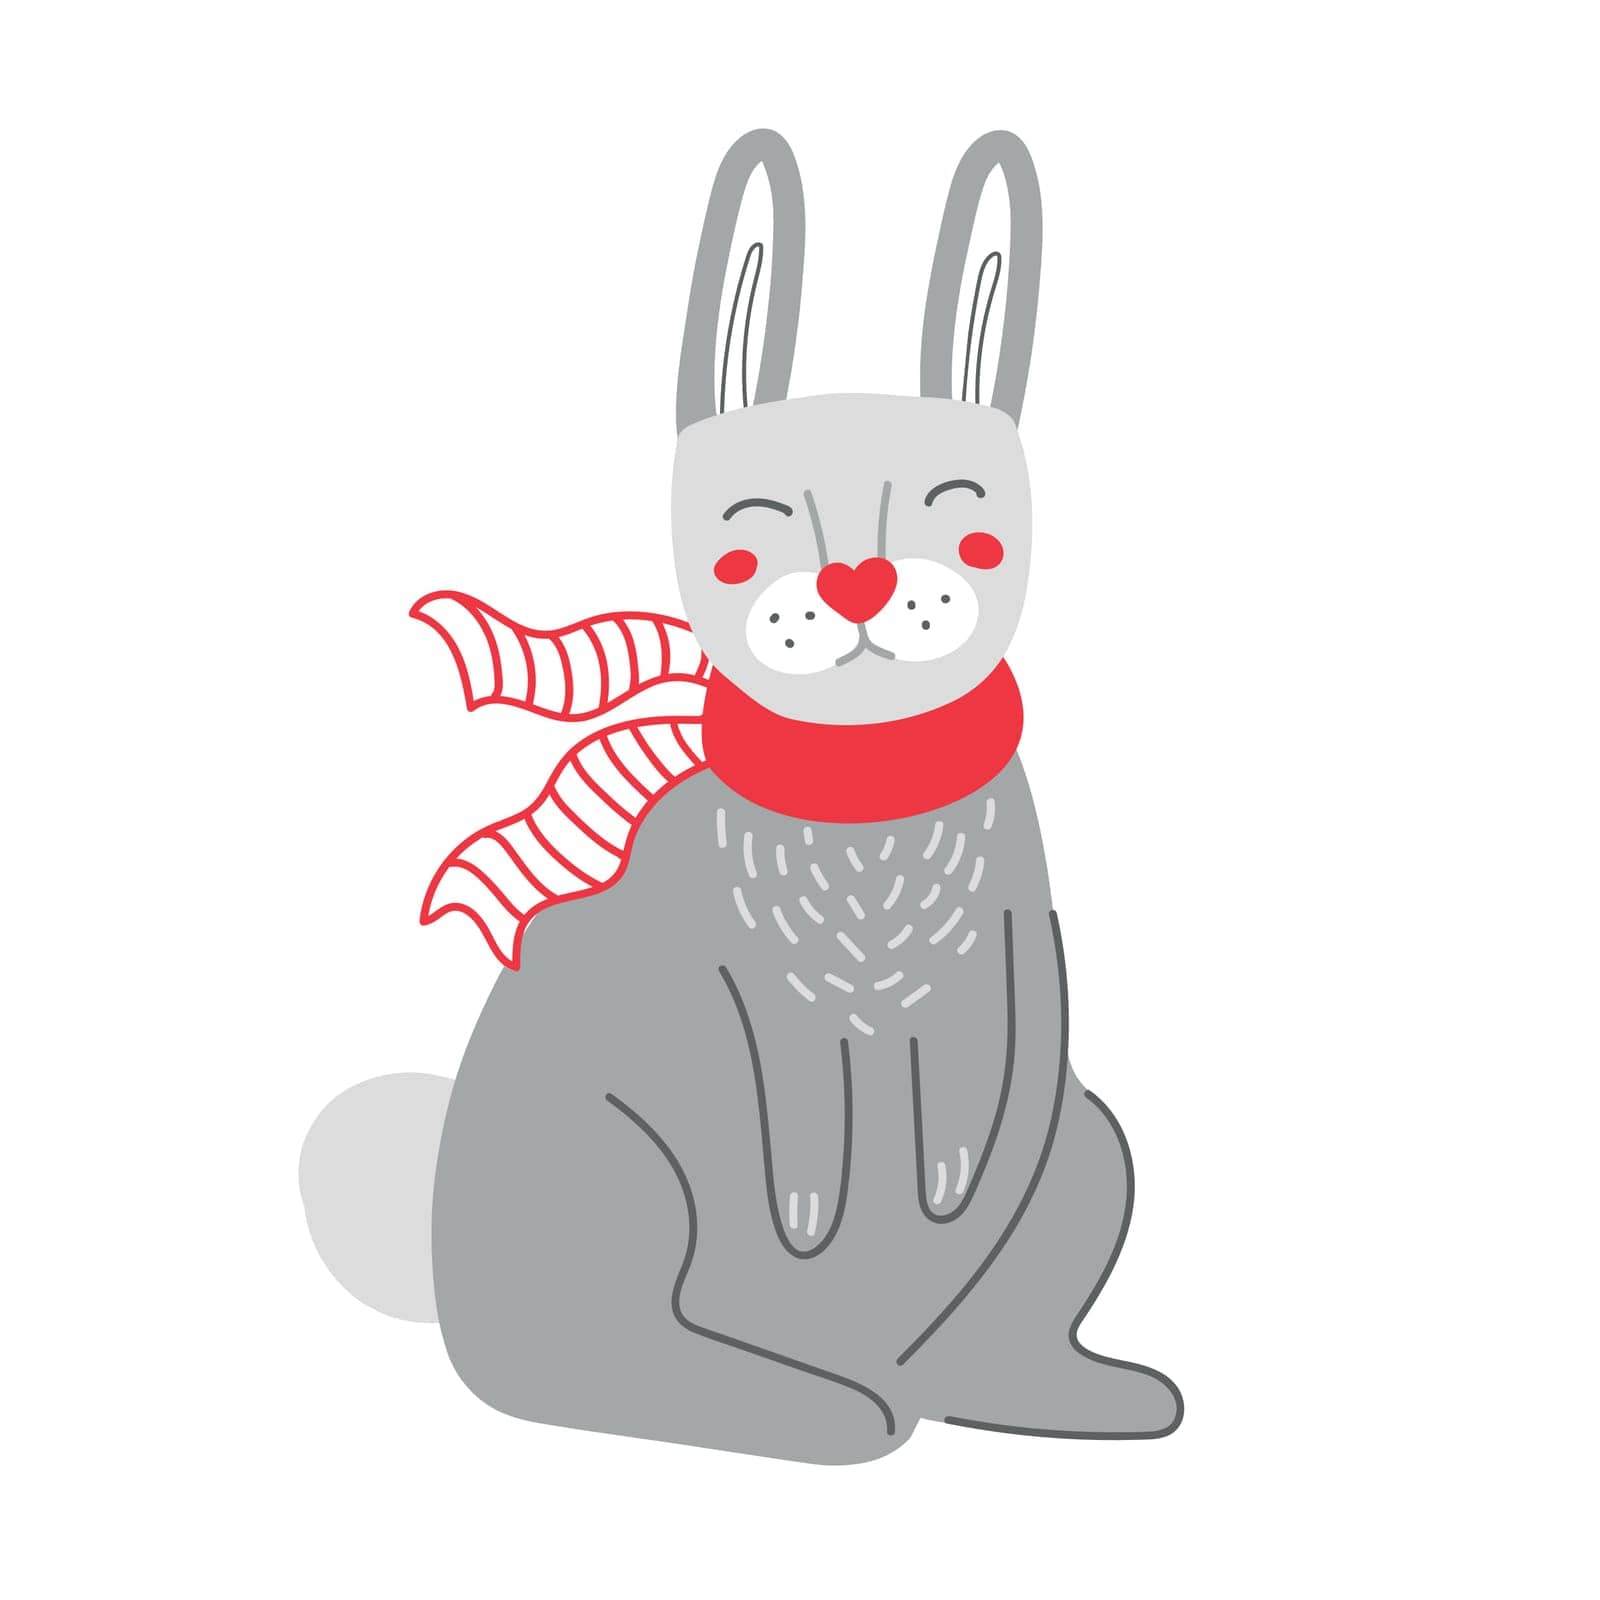 Funny cartoon rabbit in red scarf during Christmas holidays by Dustick